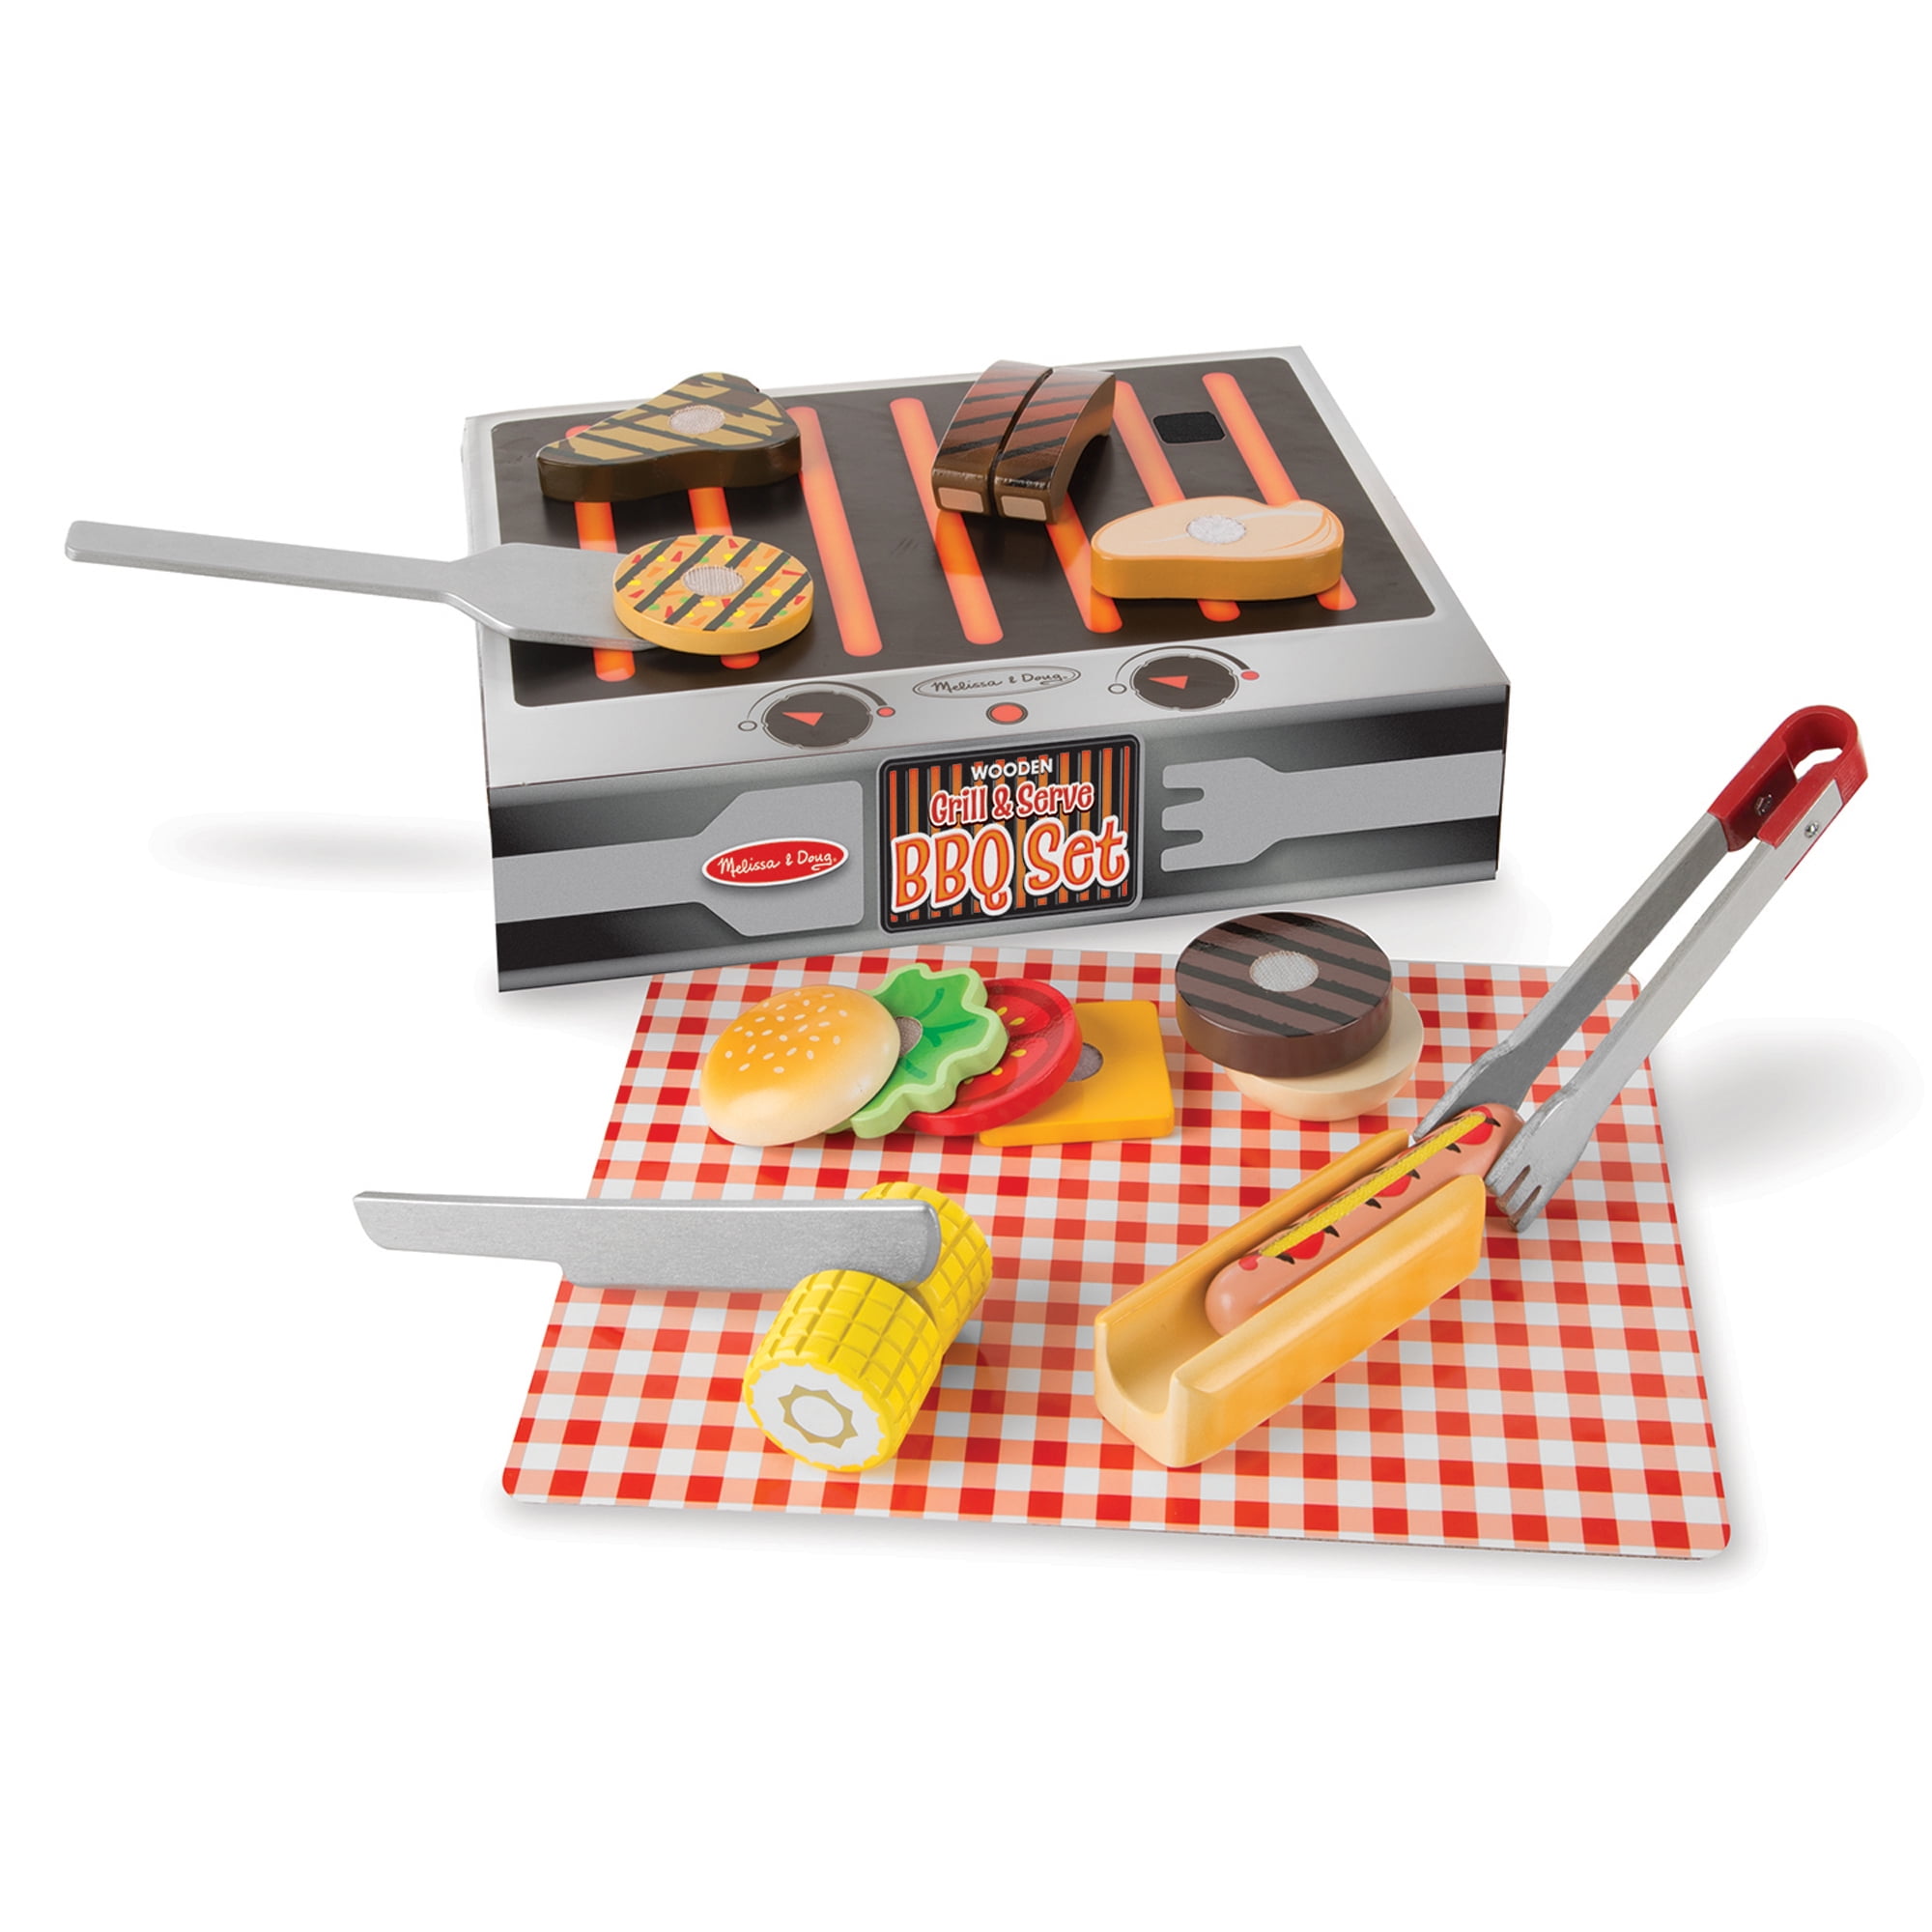 NEW Melissa and Doug Toy Wooden BBQ Play Food Grill Restaurant Set 